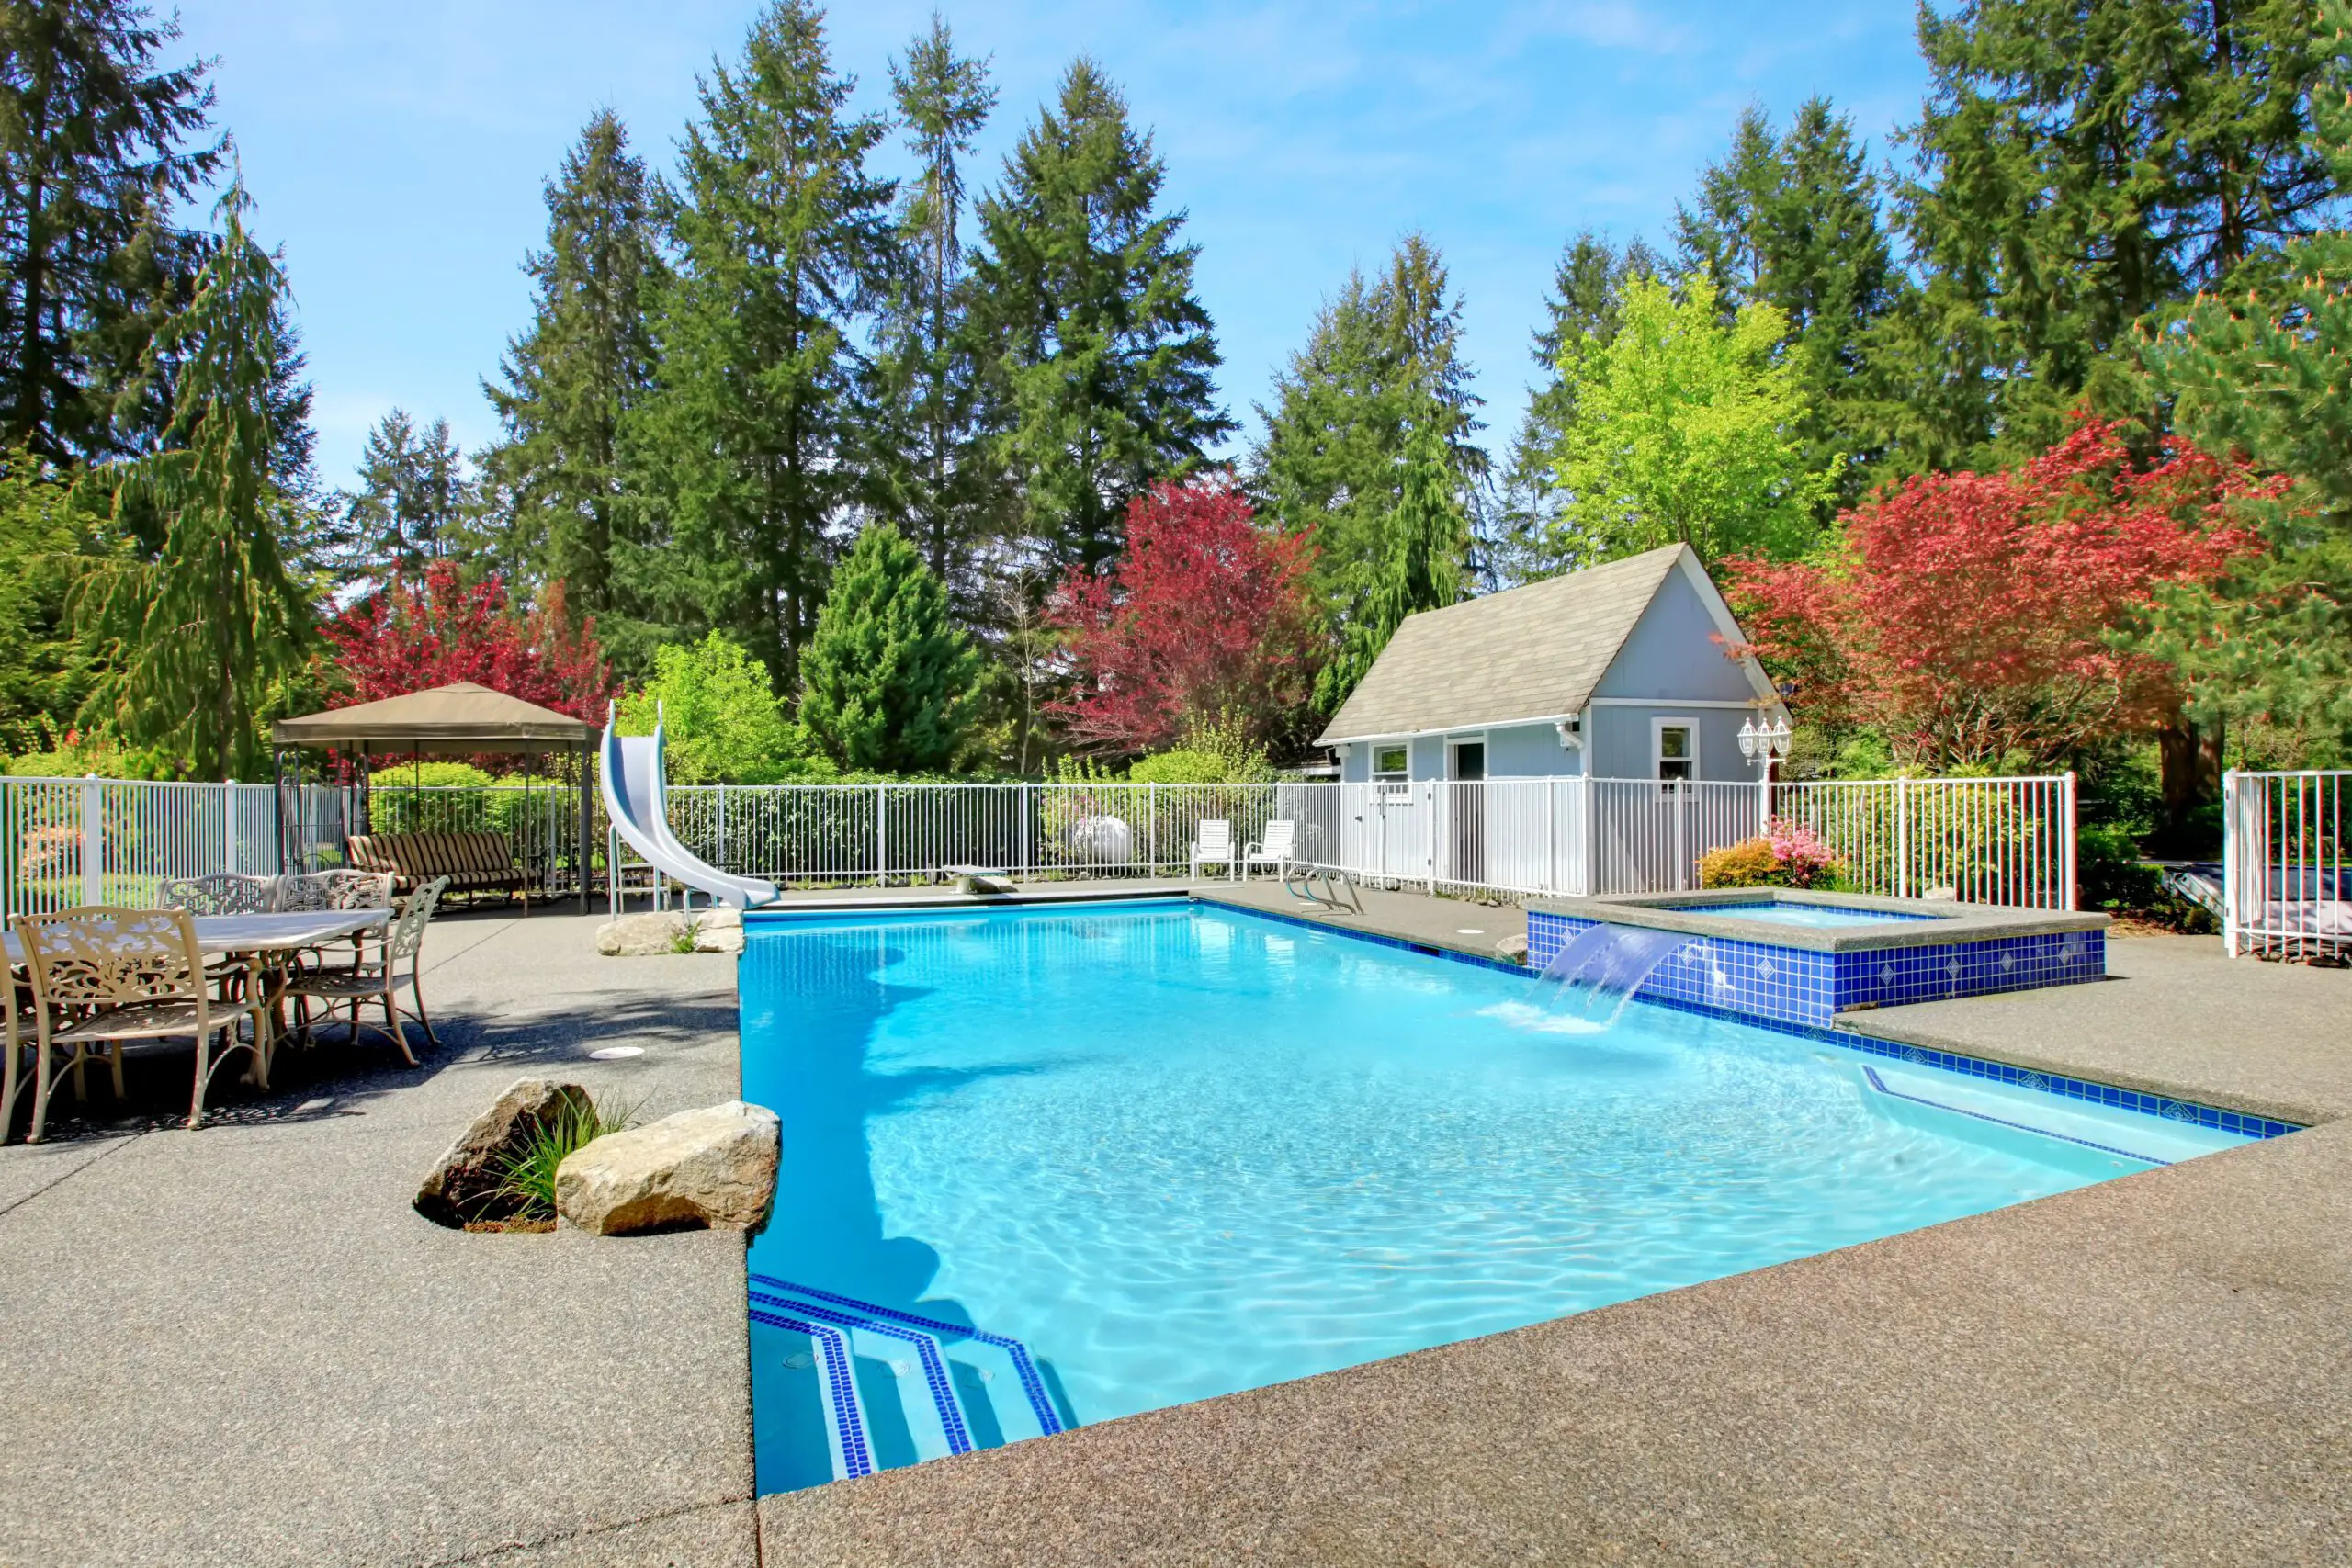 Saltwater Vs Chlorine Sanitation Pros And Cons For Swimming Pools